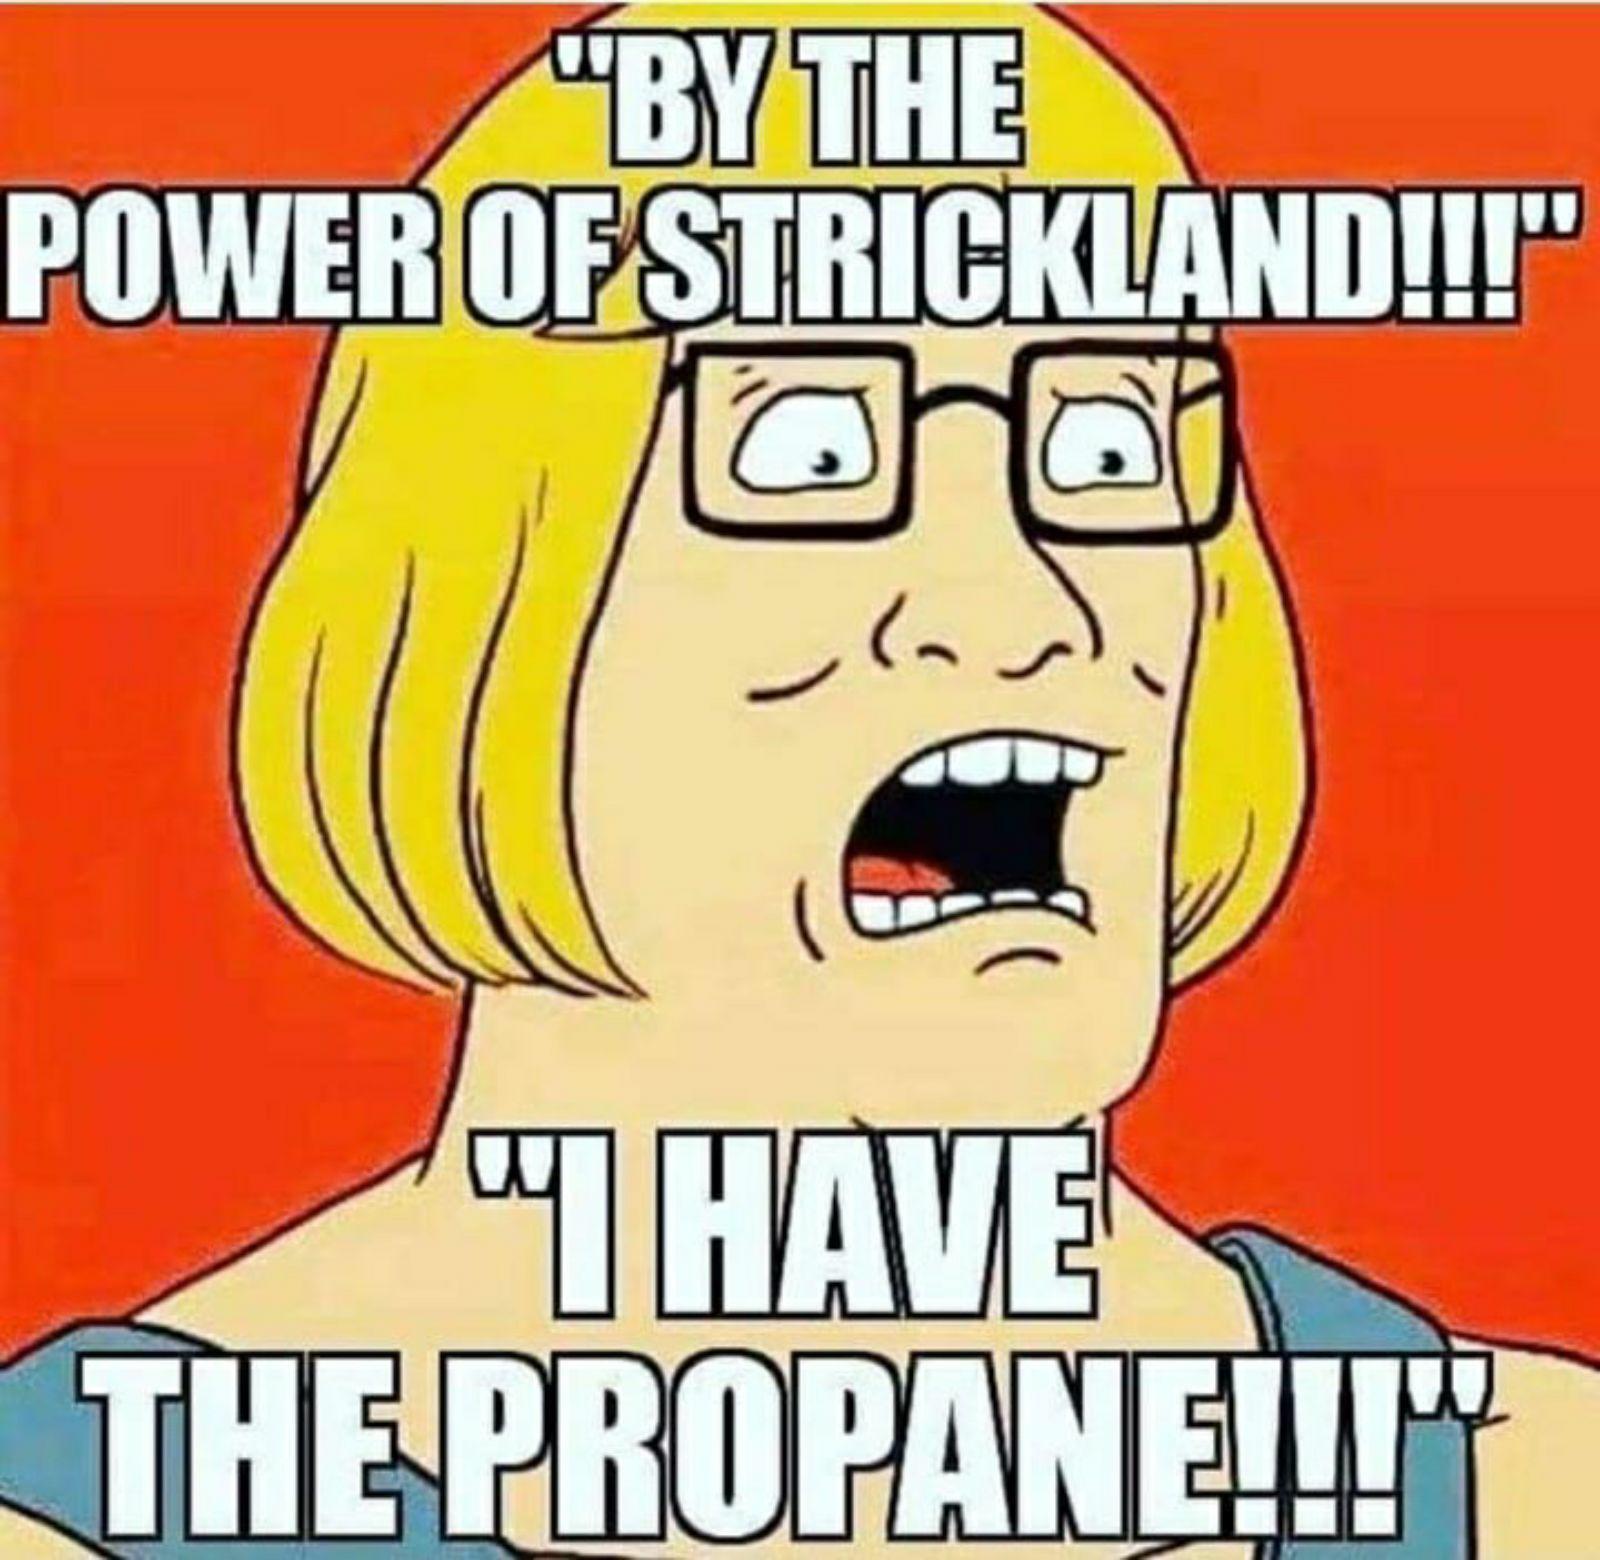 funny memes - dank memes - harsh love - "By The Power Of Strickland!!!" I Have The Propane!!!"